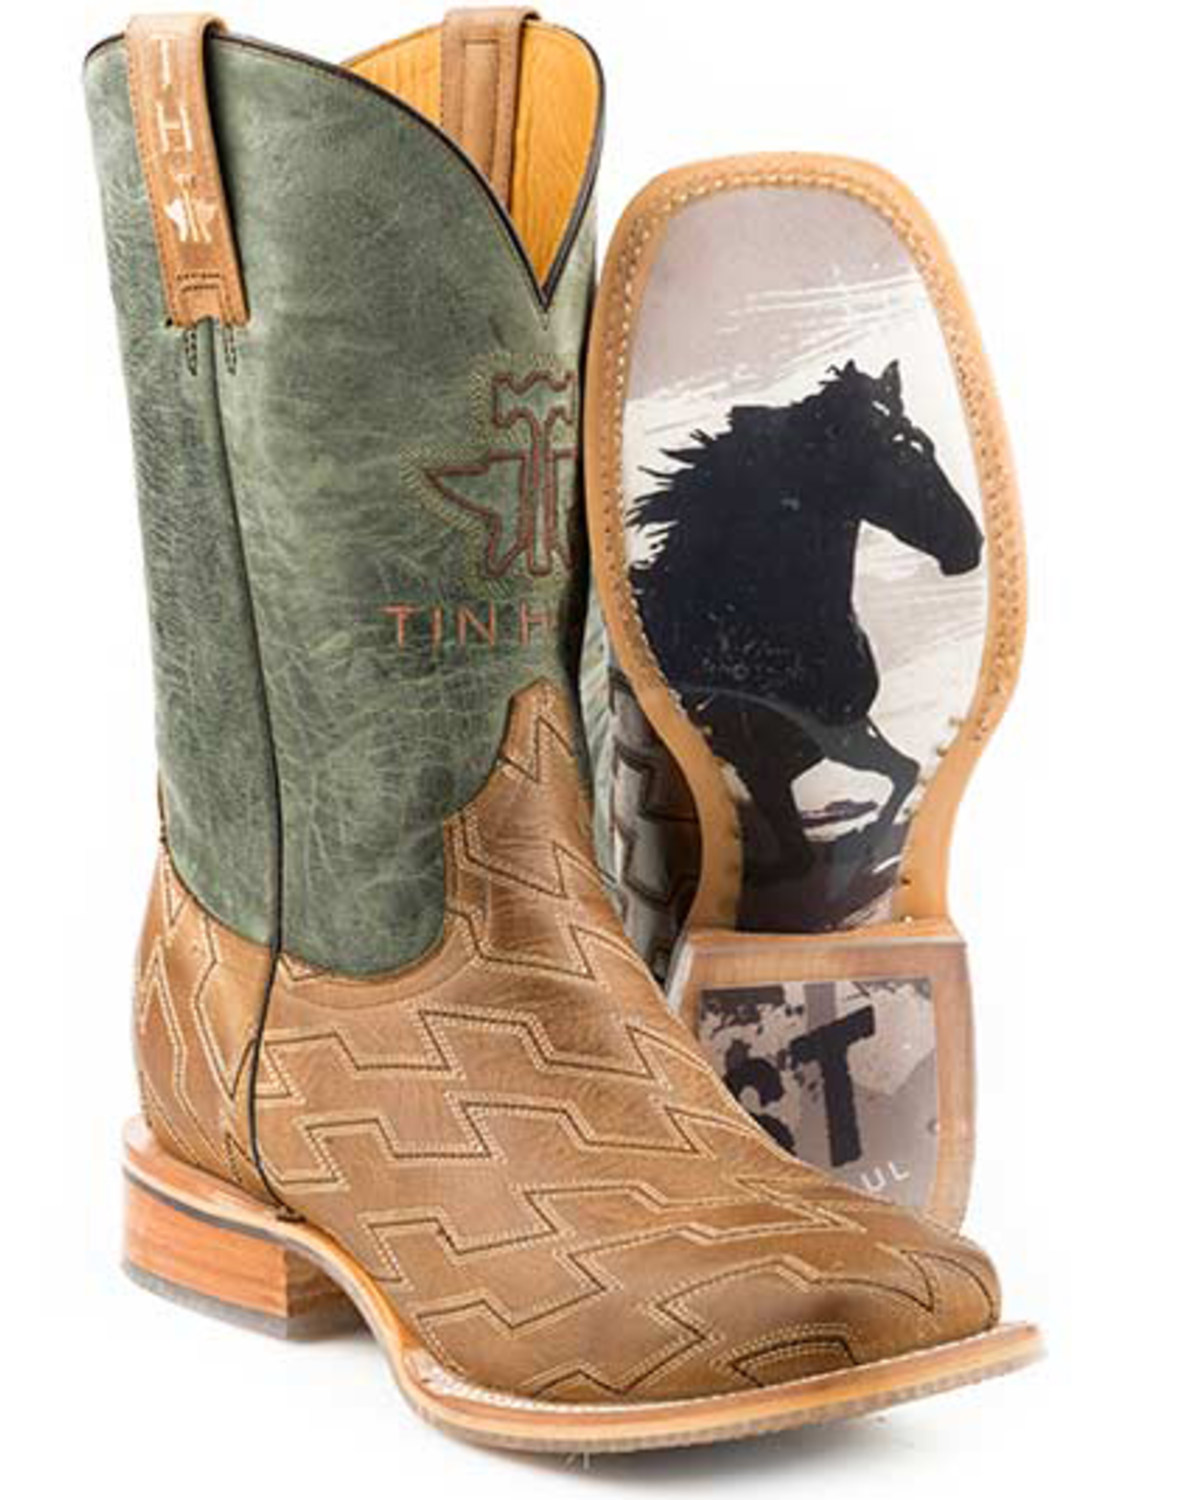 Tin Haul Men's Horse Power Western Boots - Broad Square Toe